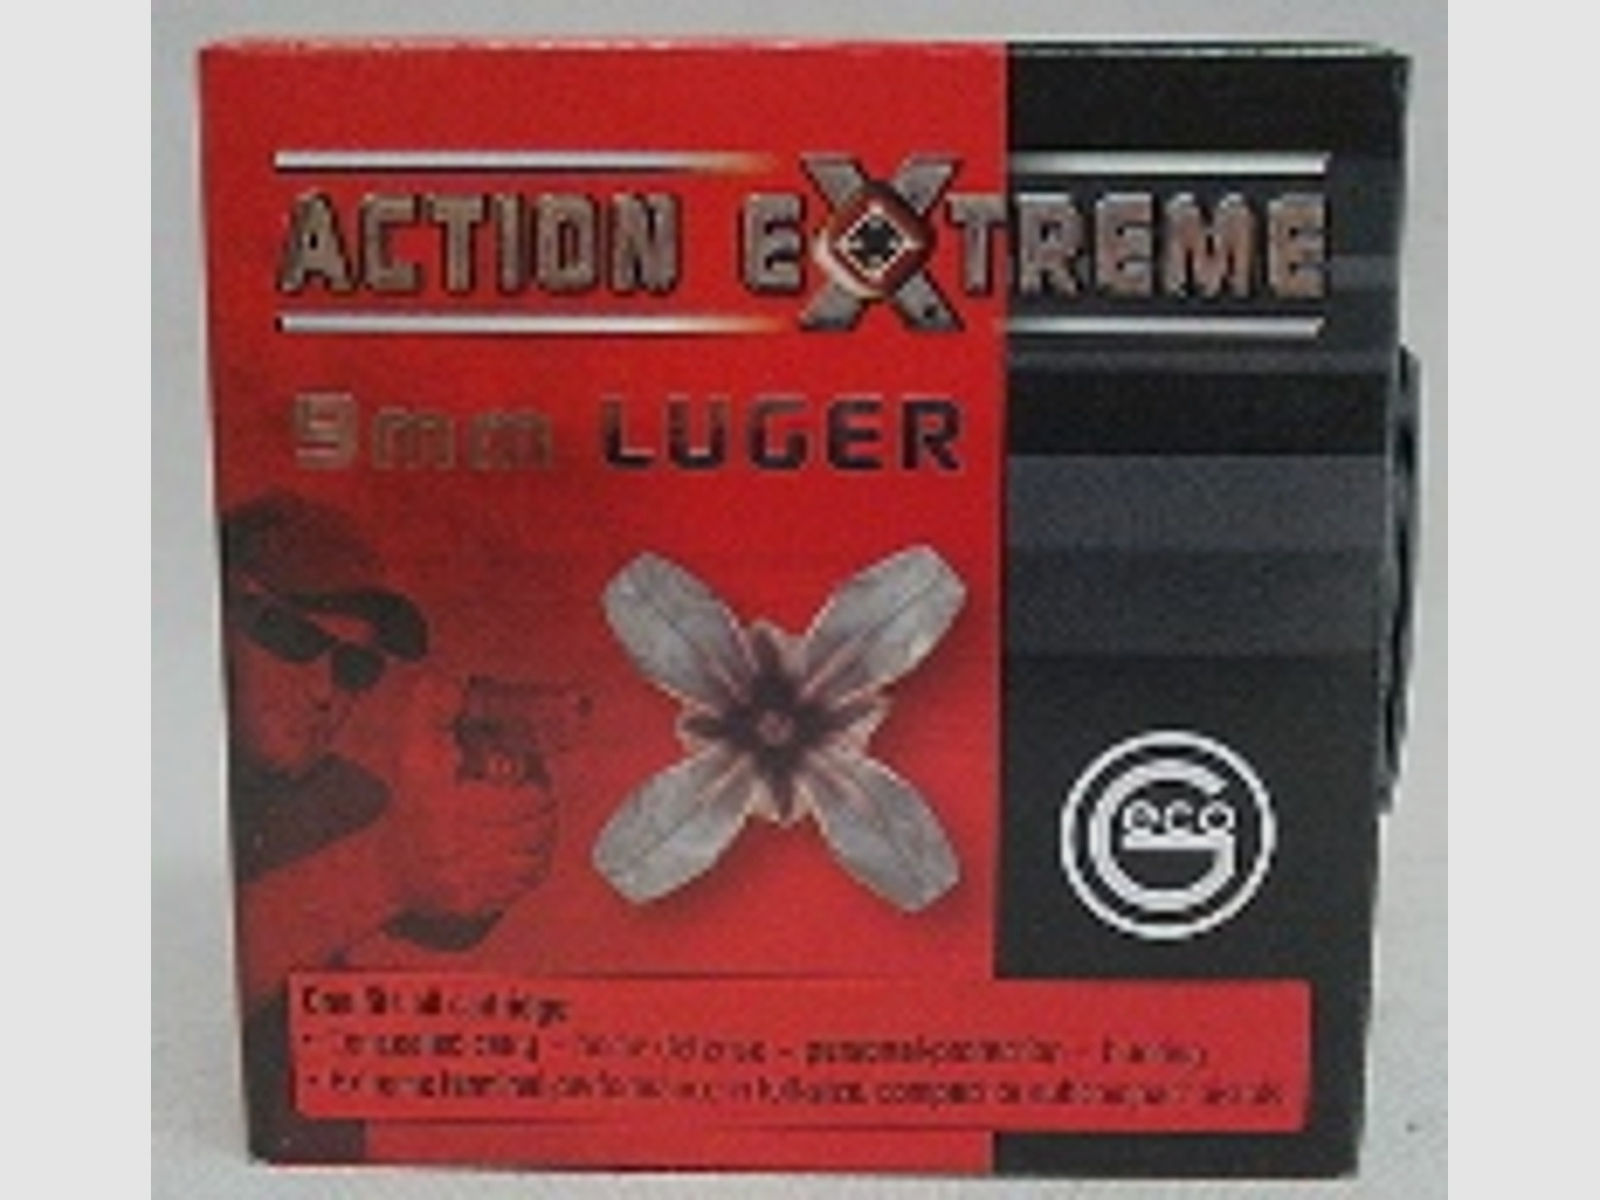 9mmLuger Extreme - 7,0g/108gr (a20)